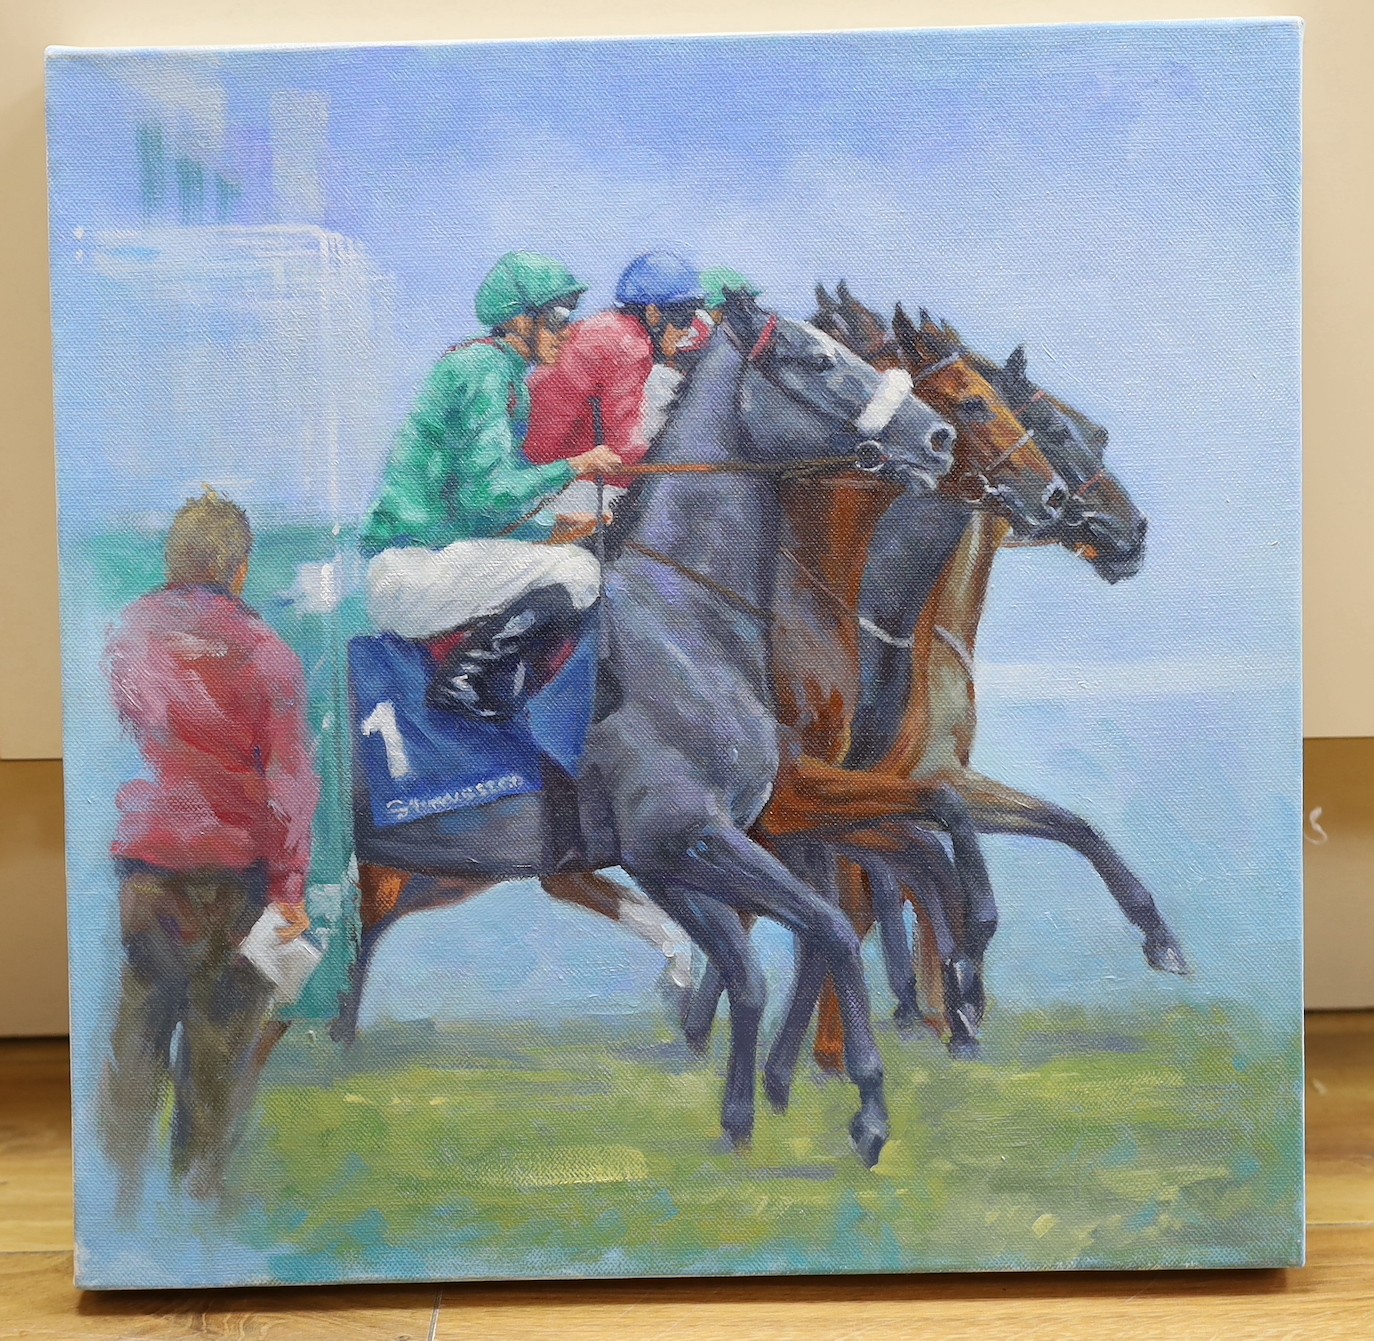 Paul Anthony Lucas, oil on canvas, Racehorses at the start', label verso, 40 x 40cm, unframed